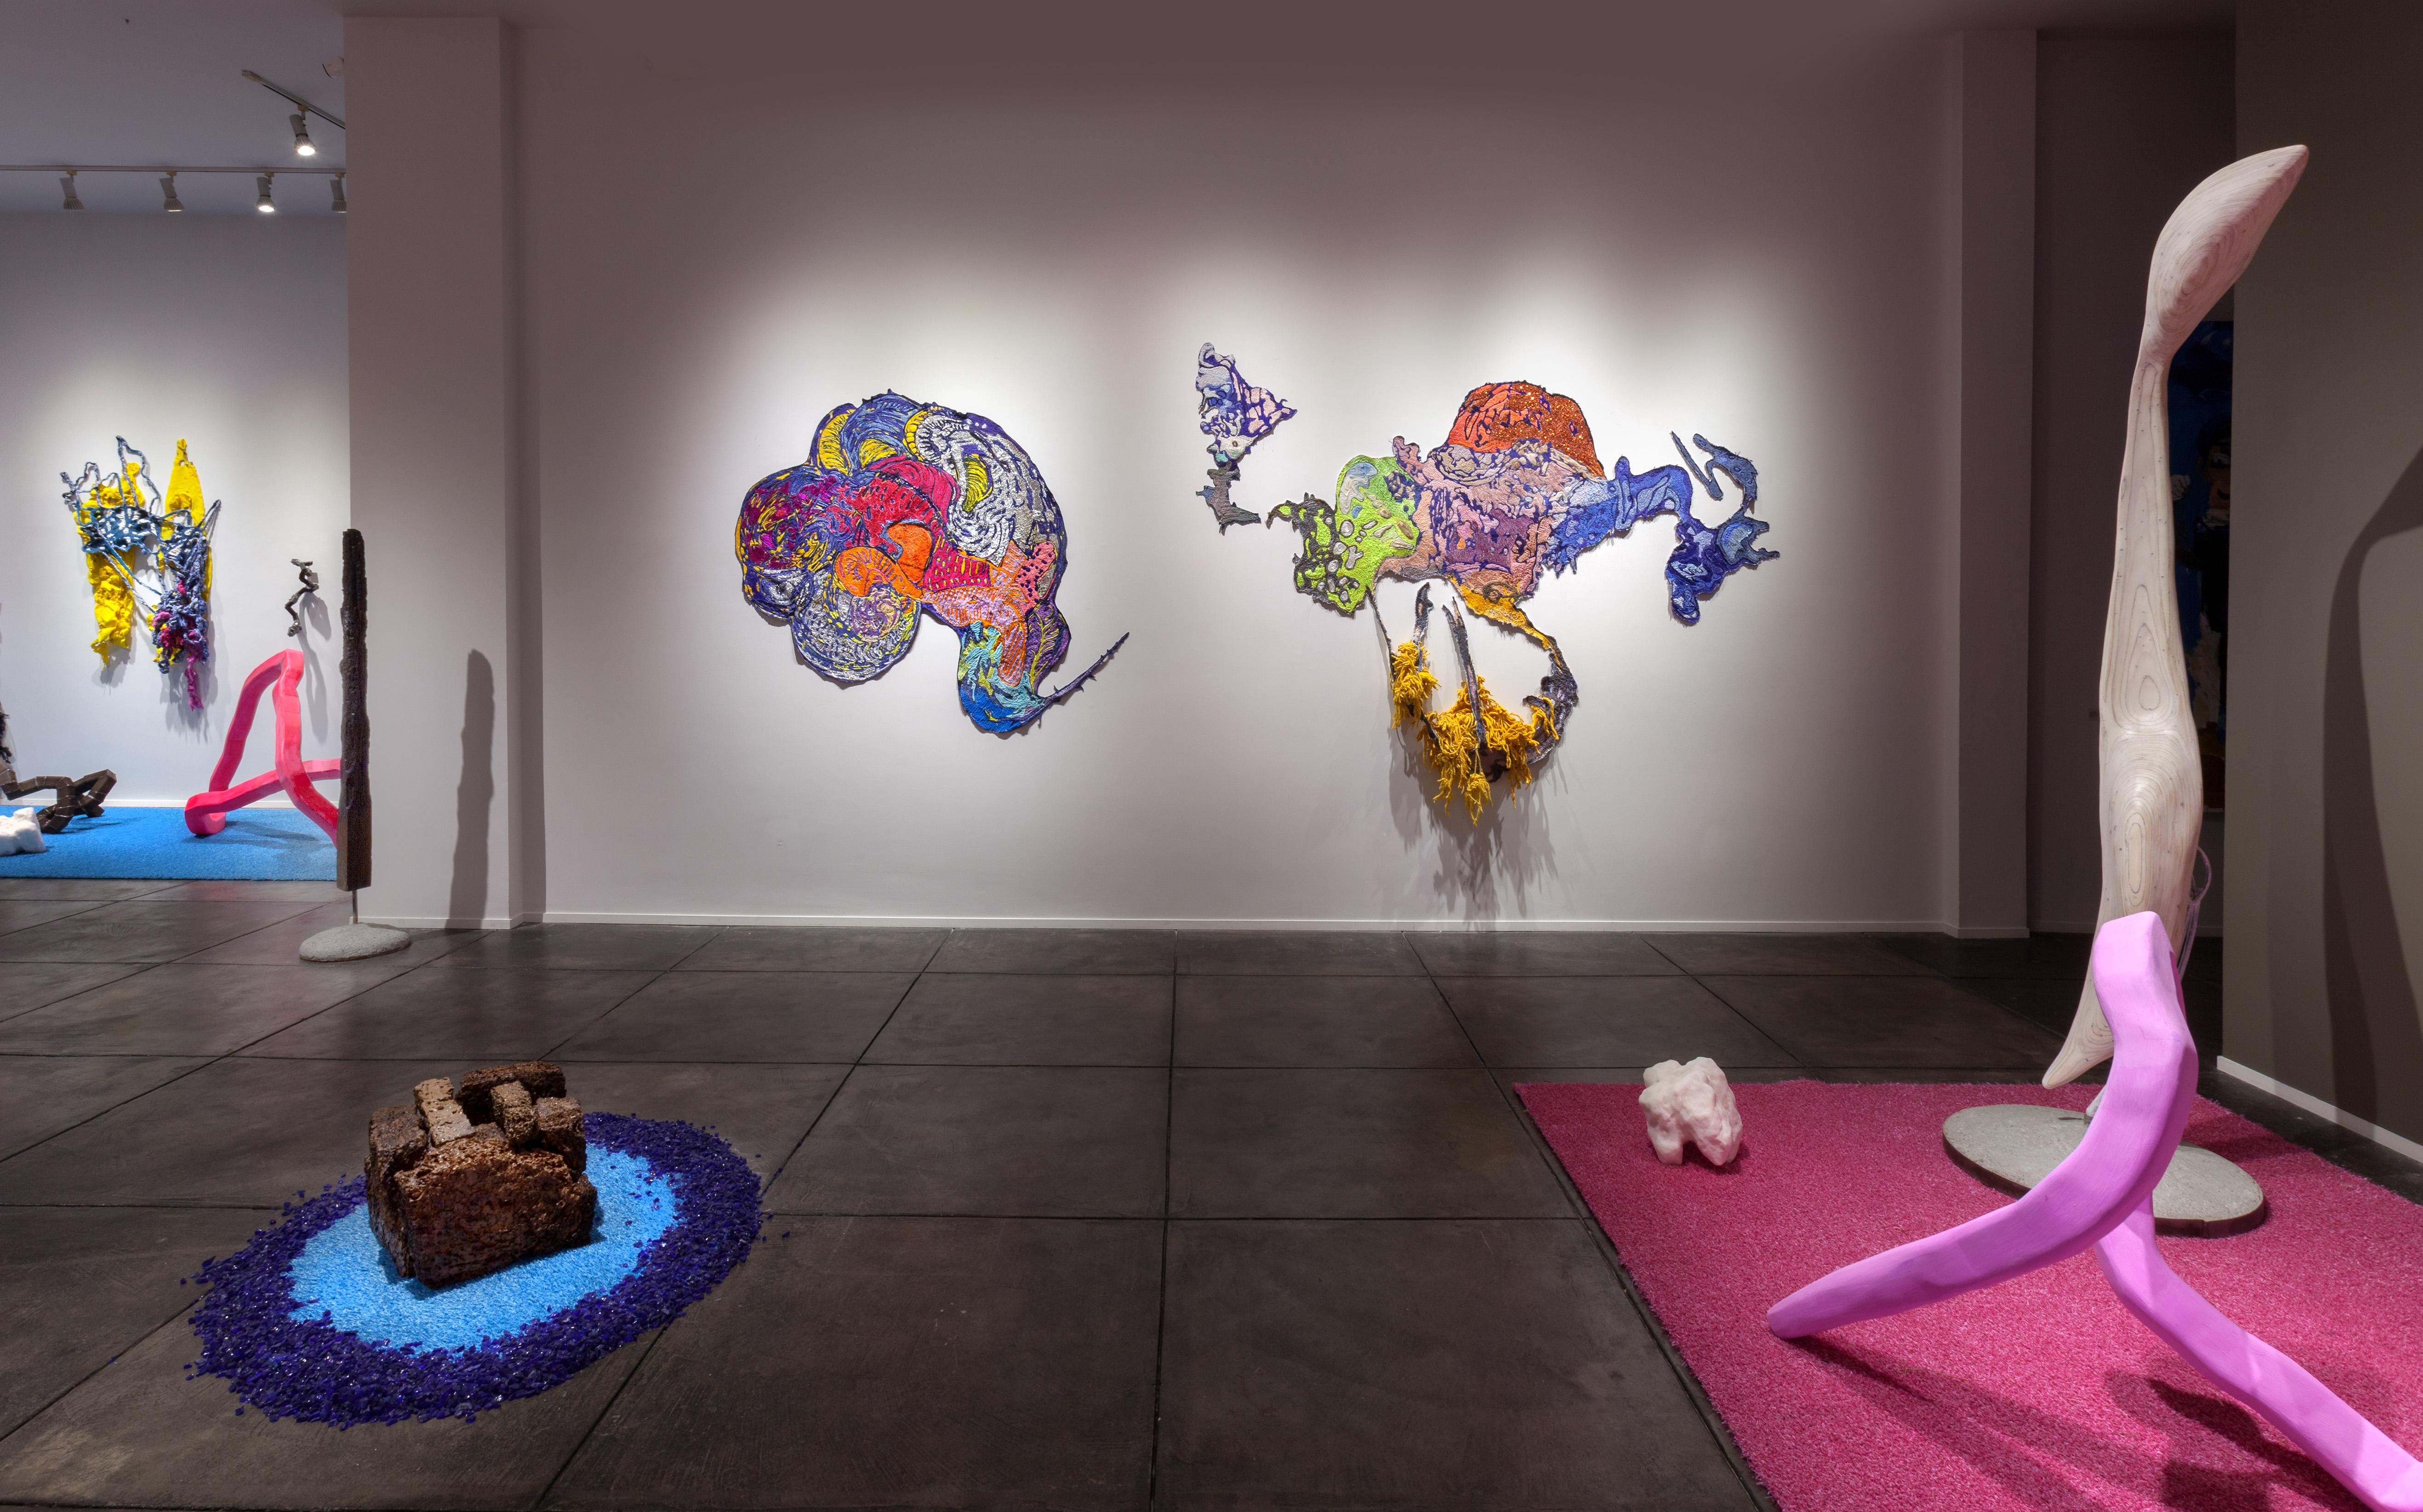 JONATHAN FERRARA GALLERY is proud to announce, Shape-Memory, a solo exhibition of new textile and sculptural artworks by New Orleans-based artist Gina Phillips. Initially born from her residency at the Joan Mitchell Center and further inspired by a